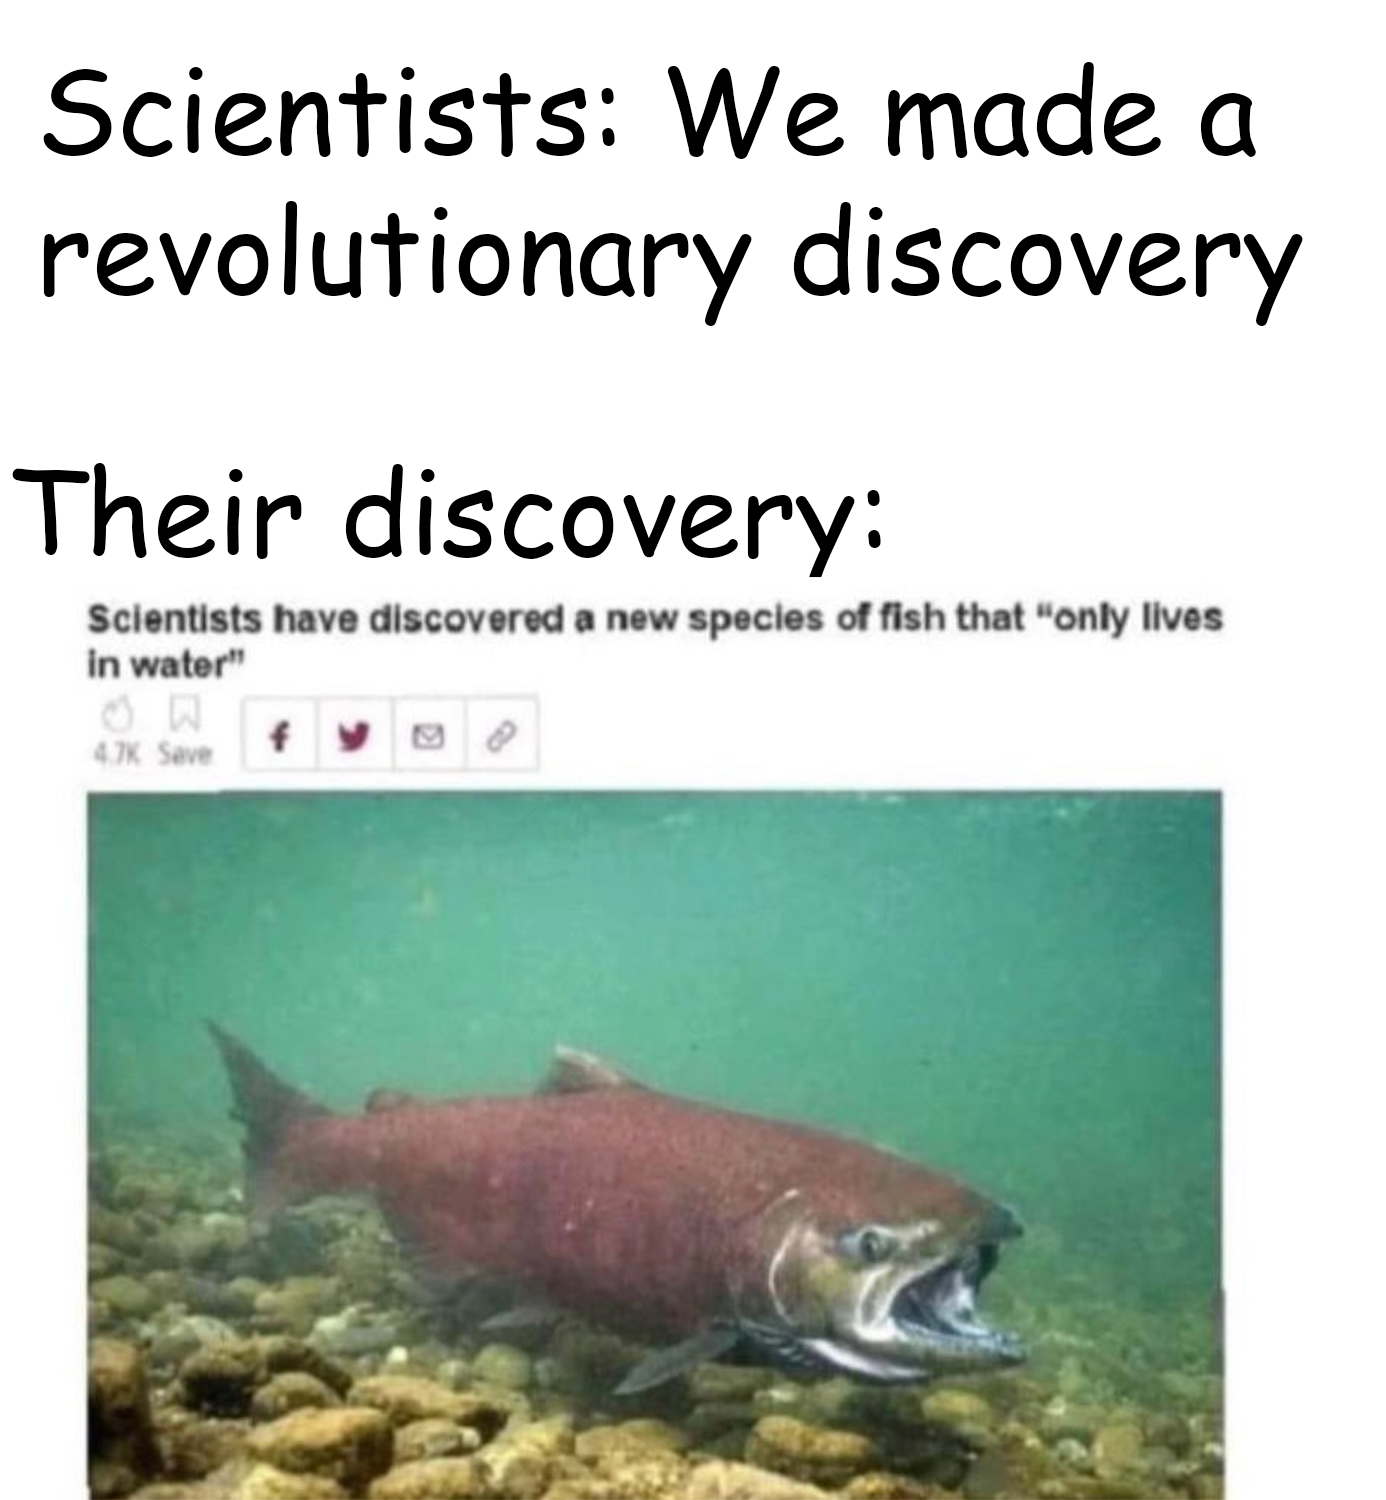 newly discovered water fish - Scientists We made a revolutionary discovery Their discovery Scientists have discovered a new species of fish that "only Ilves in water" On